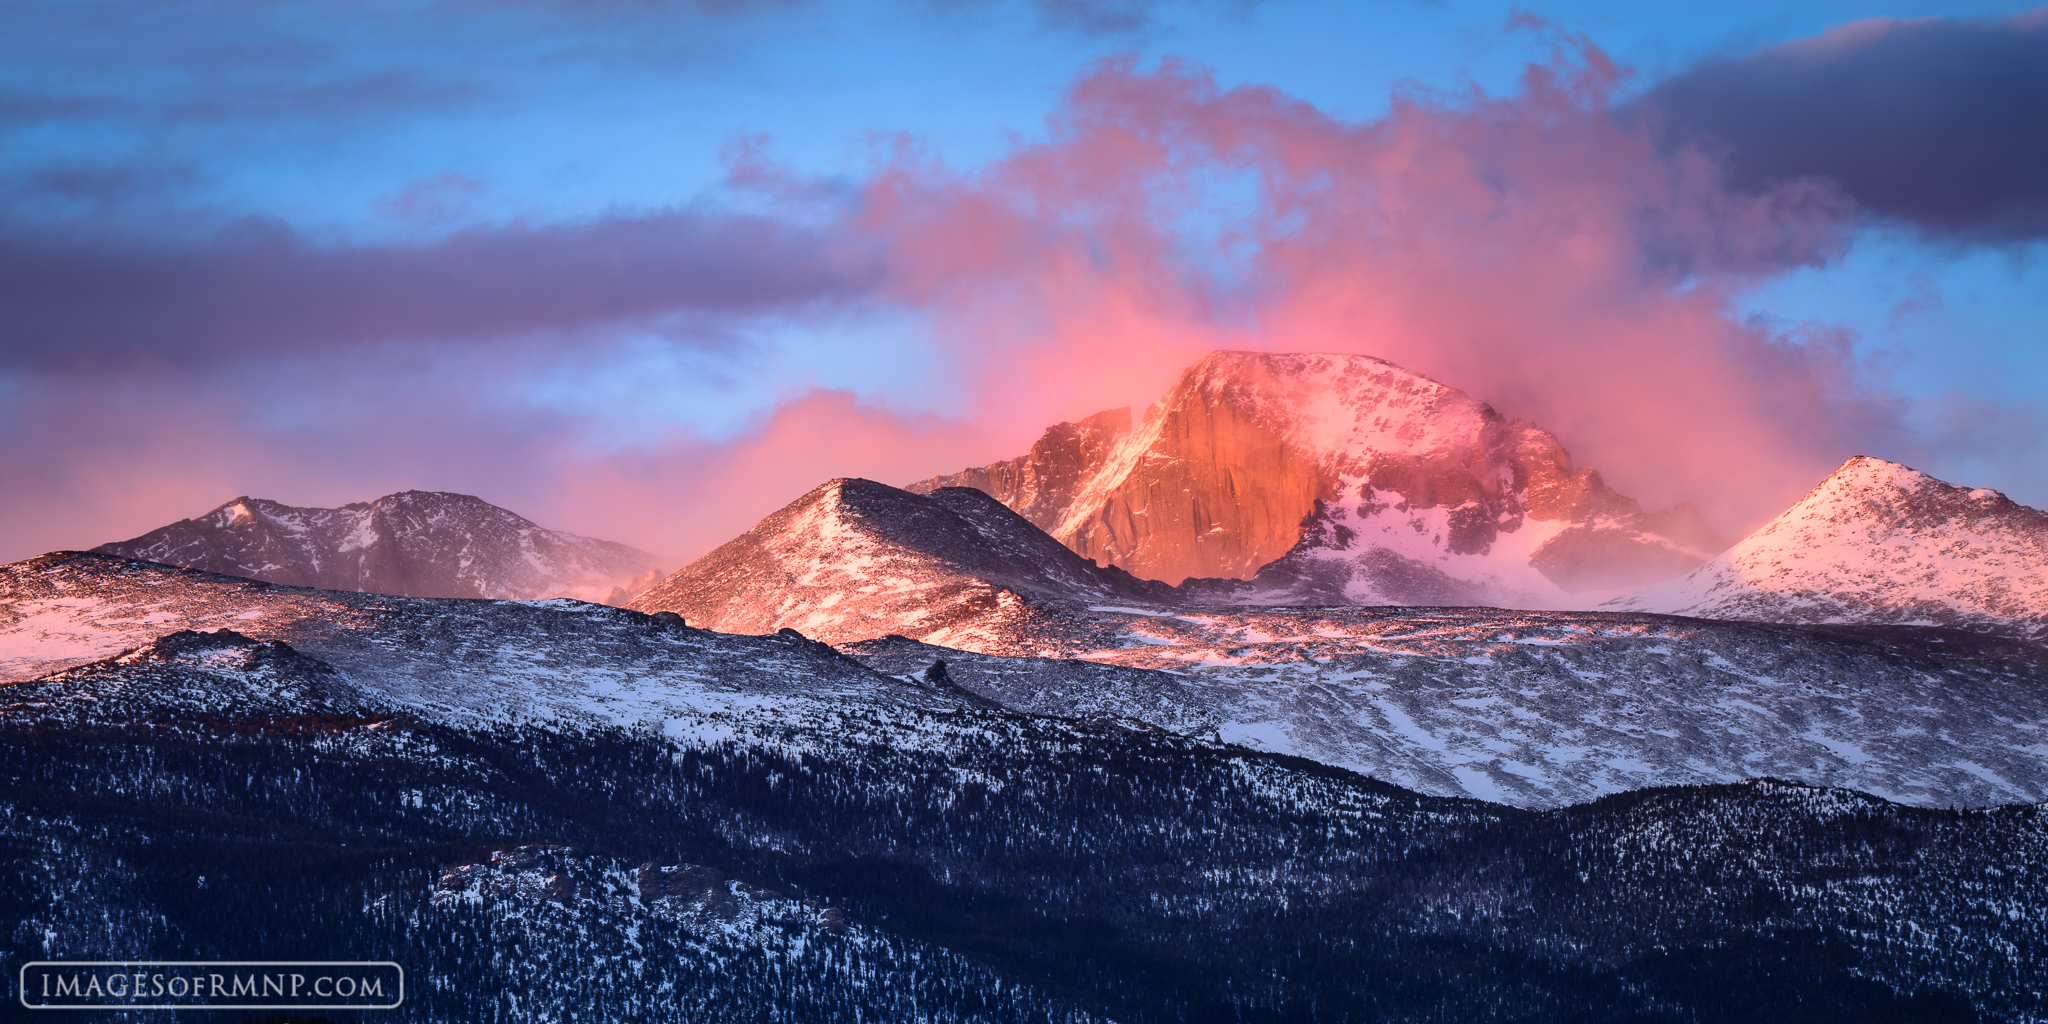 On this morning we were treated to a spectacular sunrise on Longs Peak for a brief minute. In these special moments time seems...